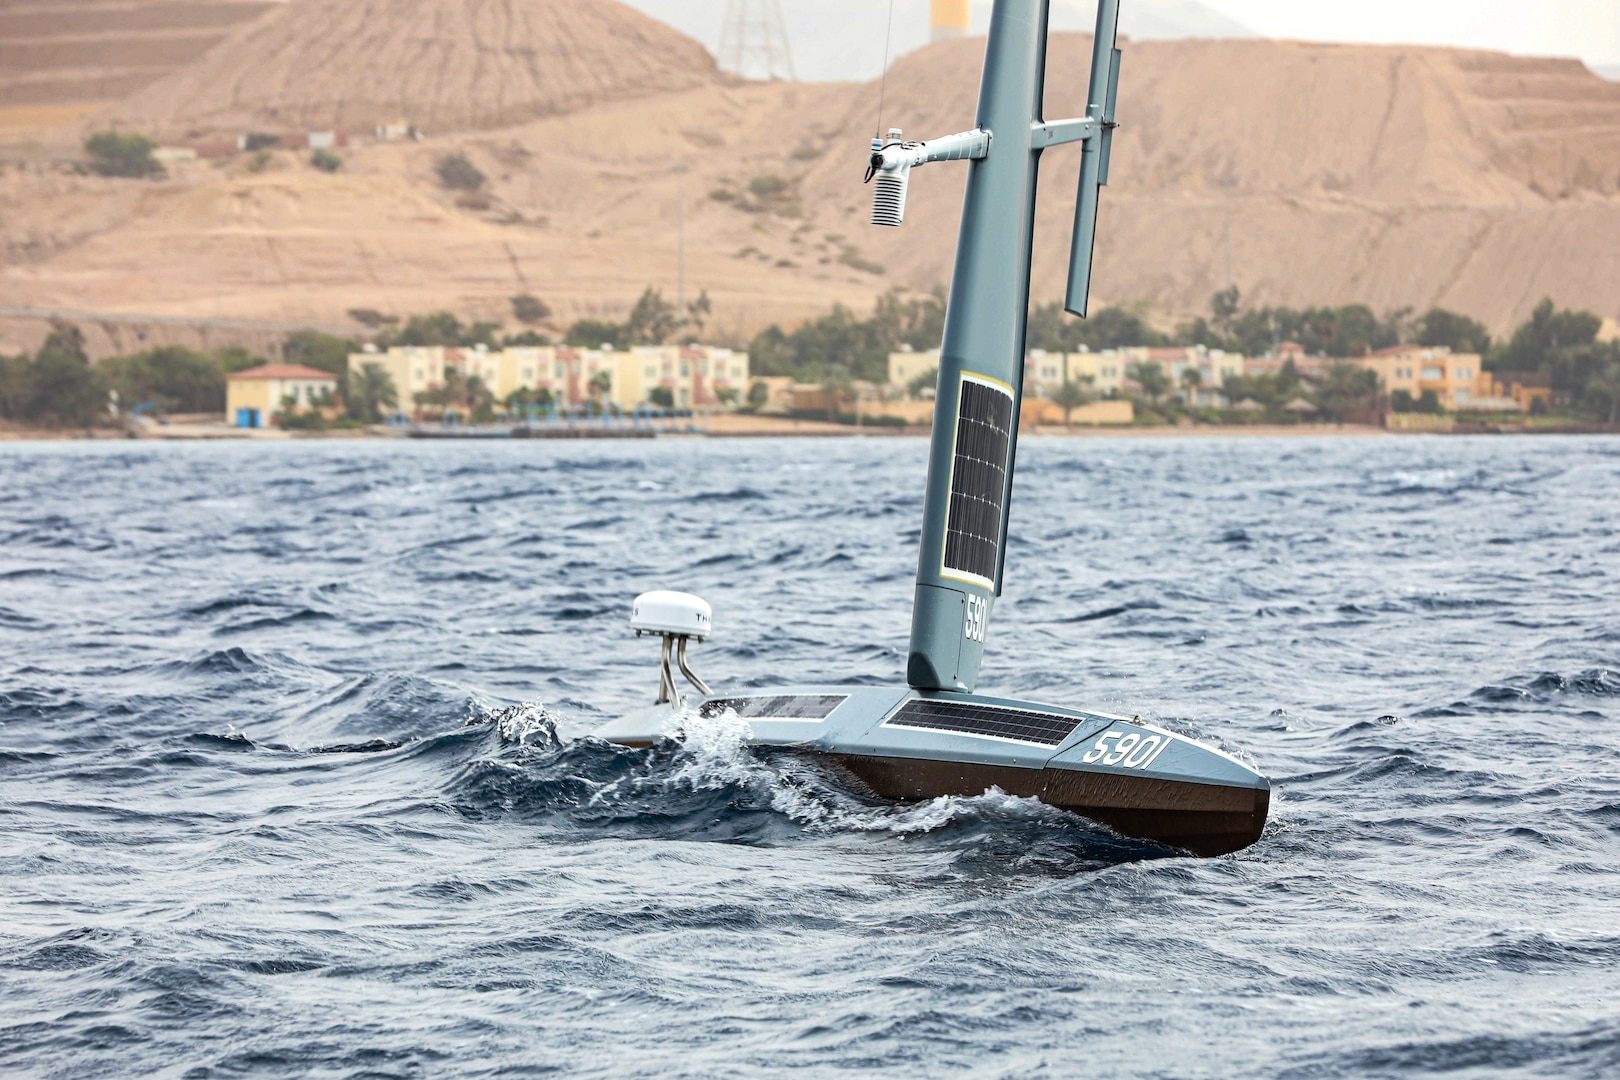 GULF OF AQABA (Dec. 12, 2021) A Saildrone Explorer unmanned surface vessel (USV) sails in the Gulf of Aqaba off of Jordan's coast, Dec. 12, during exercise Digital Horizon. U.S. Naval Forces Central Command began operationally testing the USV as part of an initiative to integrate new unmanned systems and artificial intelligence into U.S. 5th Fleet operations.